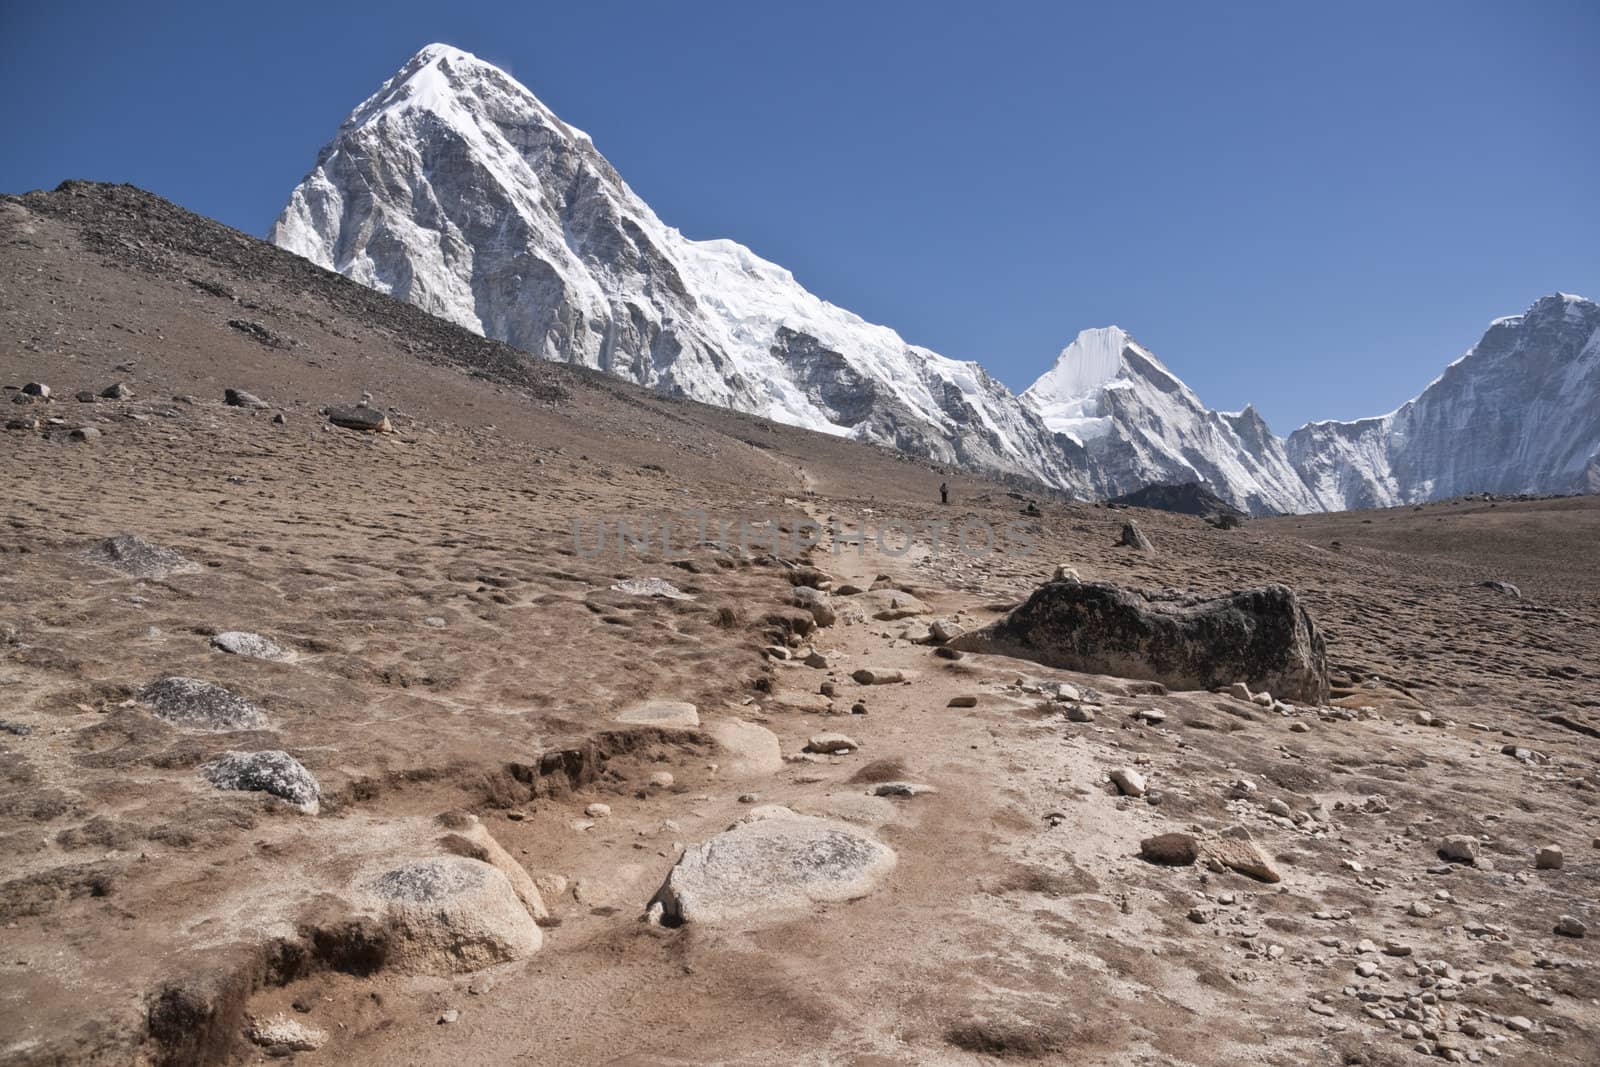 Track in the Himalaya Mountains leading to Kala Patthar (5550m) and views of Everest Base Camp.